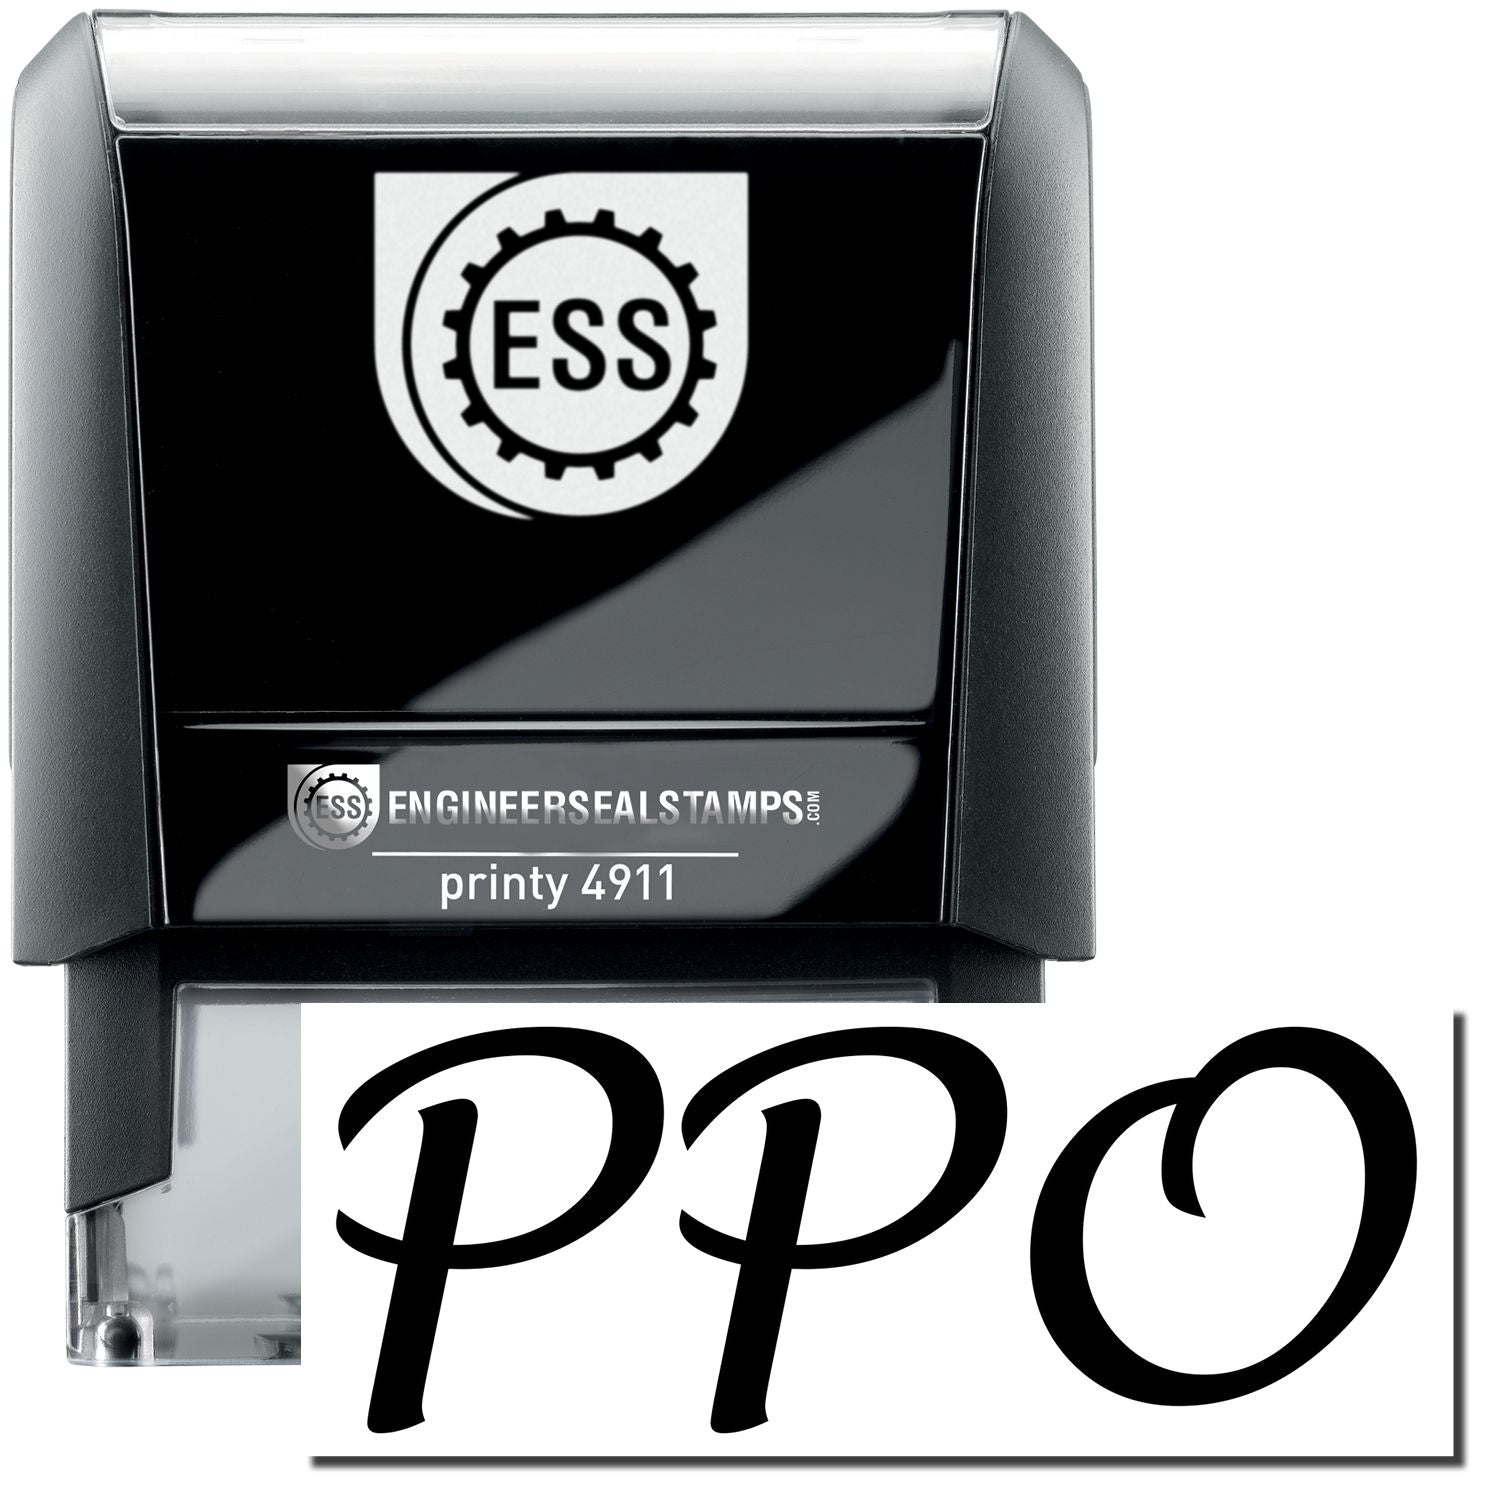 A self-inking stamp with a stamped image showing how the text "PPO" is displayed after stamping.